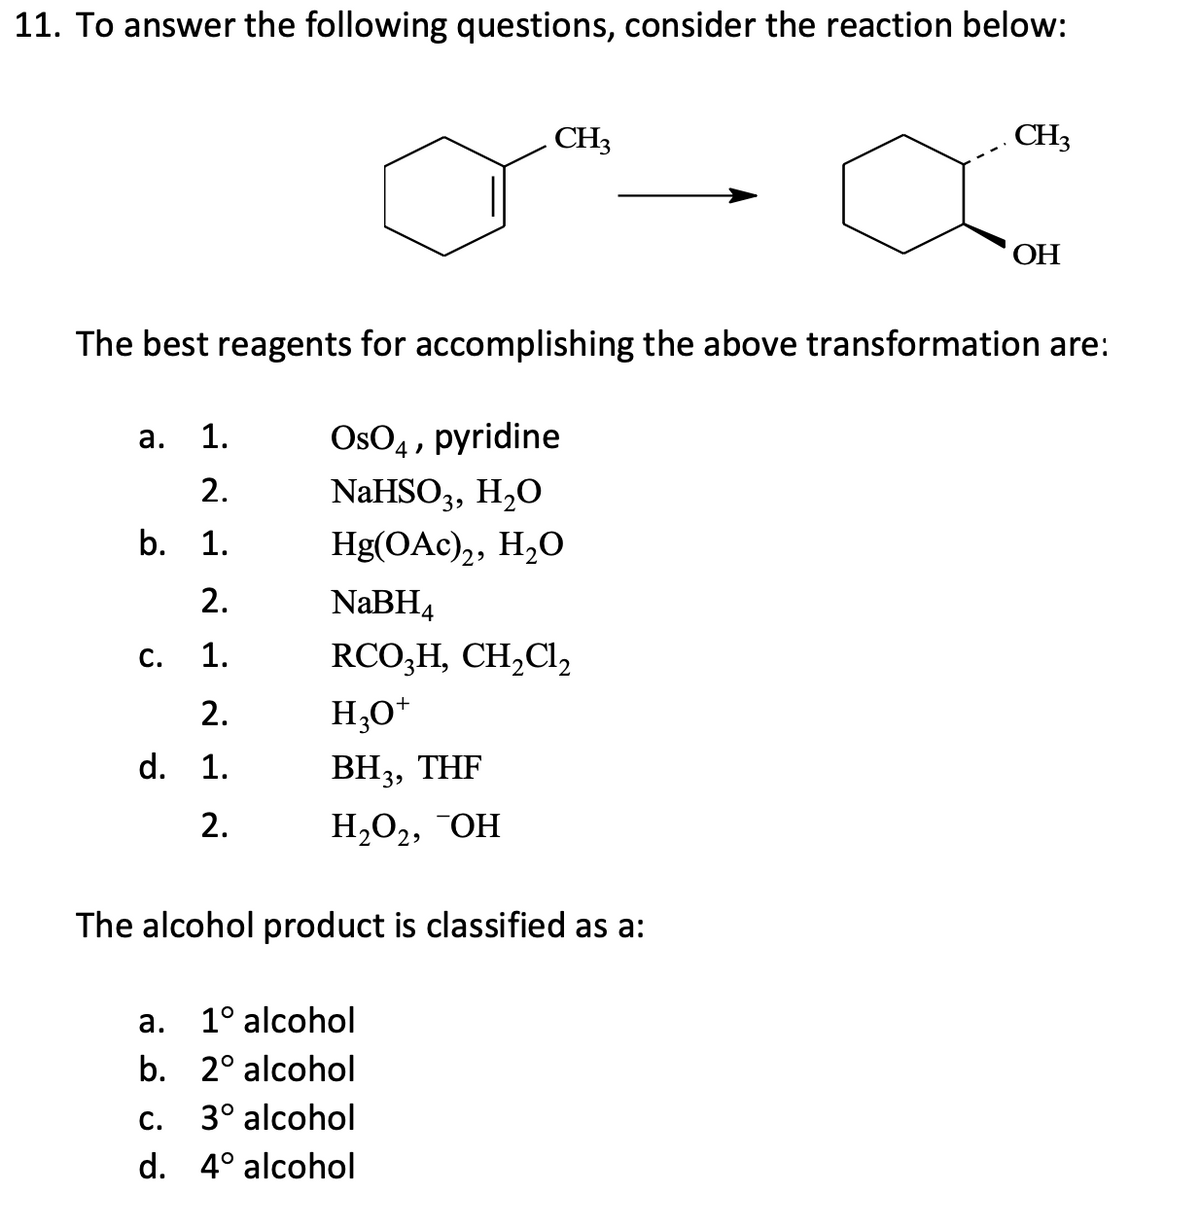 11. To answer the following questions, consider the reaction below:
a. 1.
2.
b. 1.
2.
1.
C.
The best reagents for accomplishing the above transformation are:
OsO4, pyridine
NaHSO3, H₂O
Hg(OAc)2, H₂O
2.
d. 1.
2.
CH3
NaBH4
RCO₂H, CH₂Cl₂
H3O+
BH3, THF
H₂O₂, OH
The alcohol product is classified as a:
a.
1° alcohol
b. 2° alcohol
C.
3° alcohol
d. 4° alcohol
CH3
OH